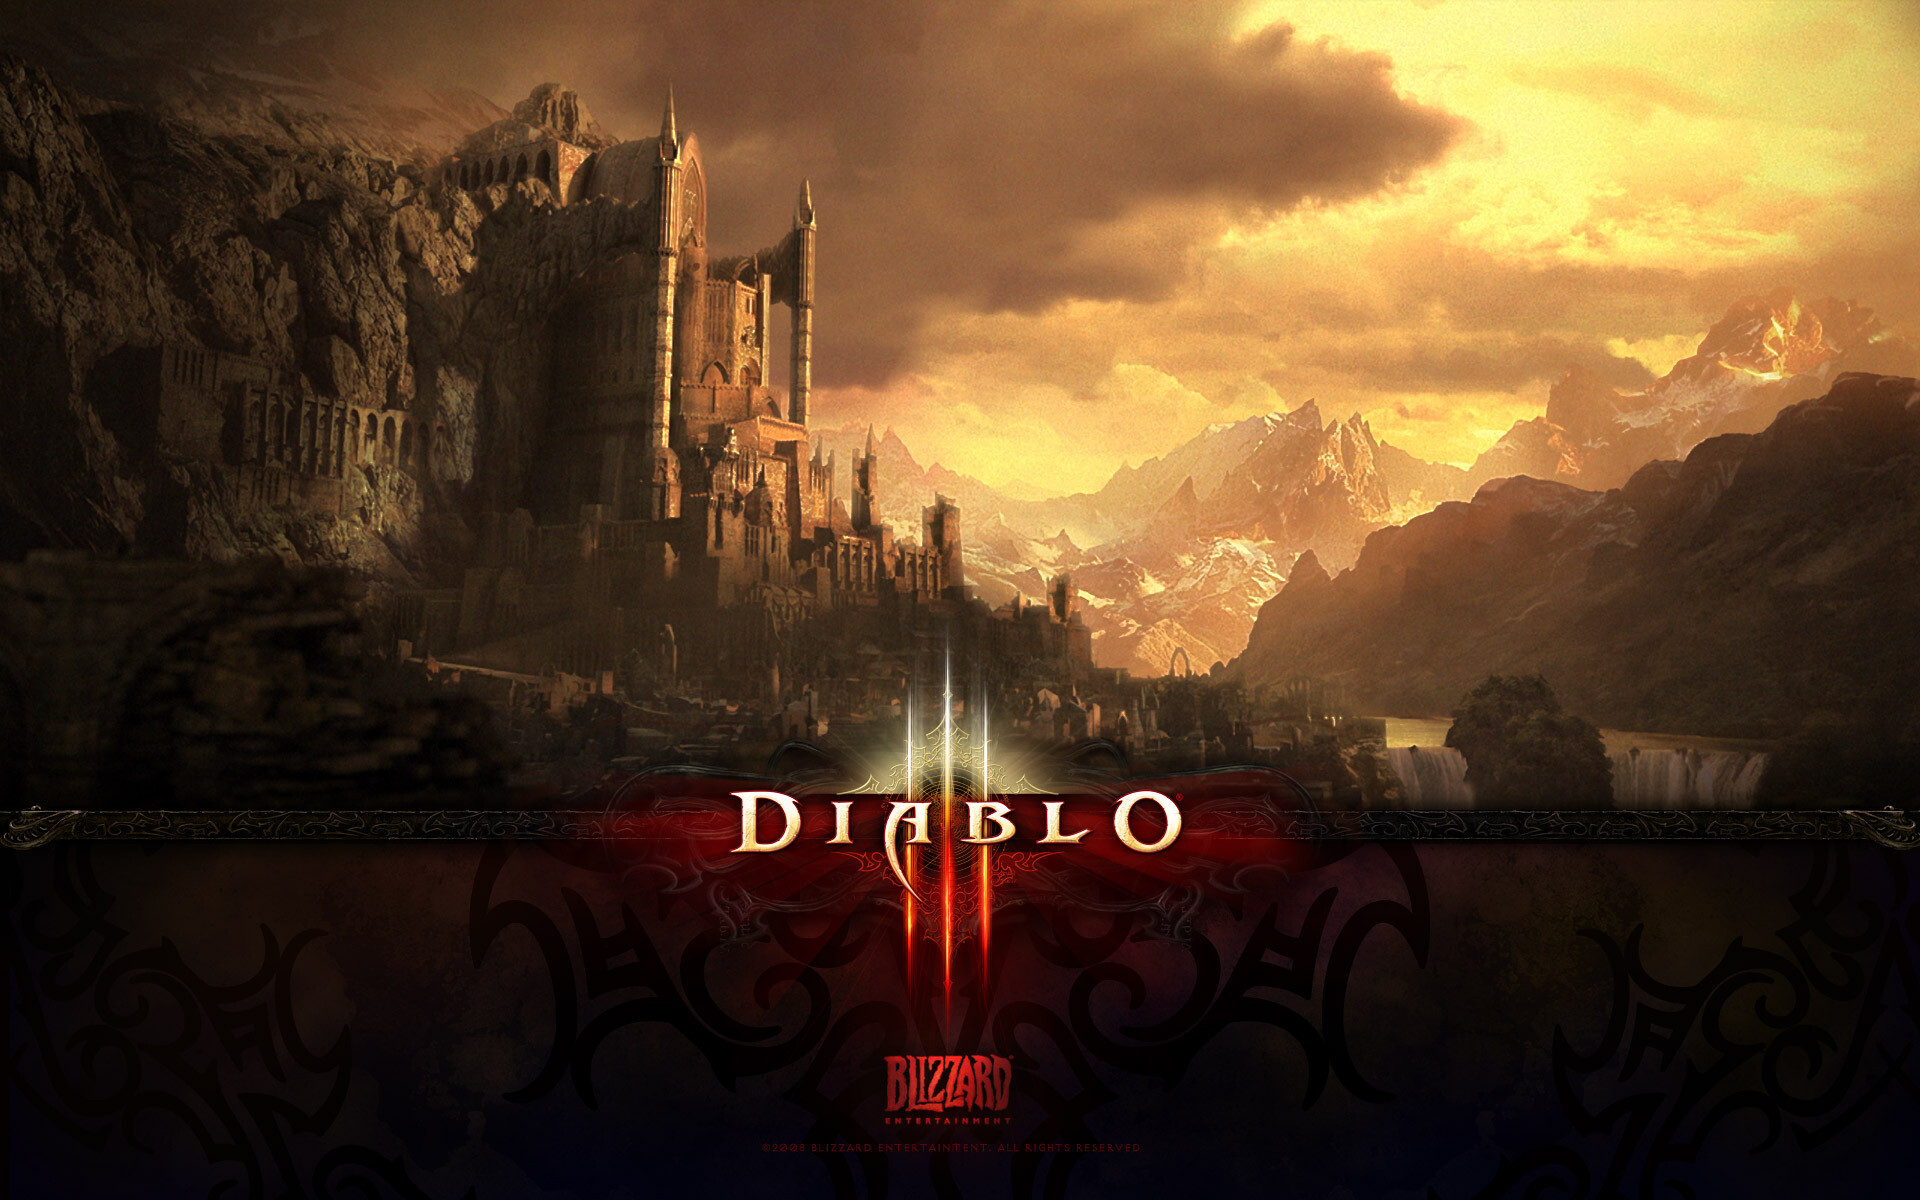 Diablo: The monsters of the game are undead monstrosities, vicious nocturnals, and demons spawned from Hell. 1920x1200 HD Background.